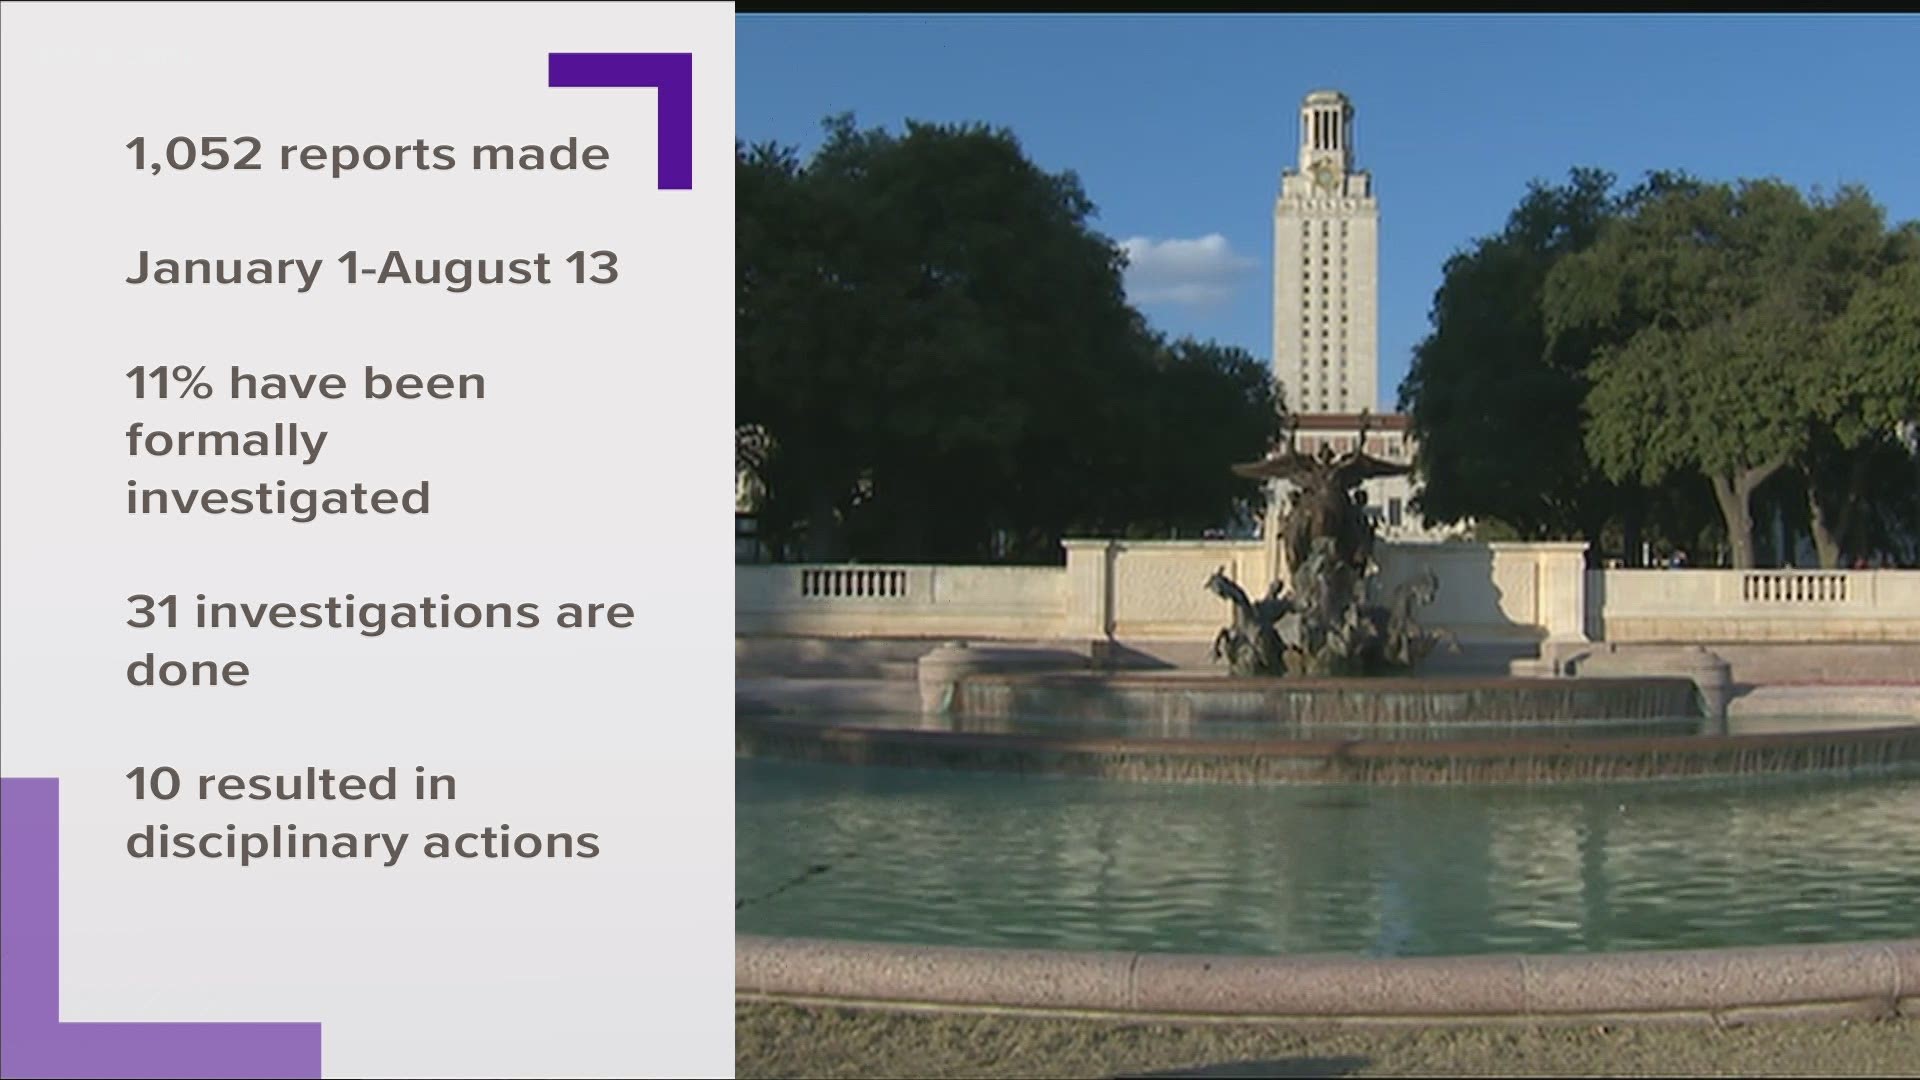 More than 1,000 reports of harassment, including sexual assault, were made to University of Texas employees throughout much of 2020.